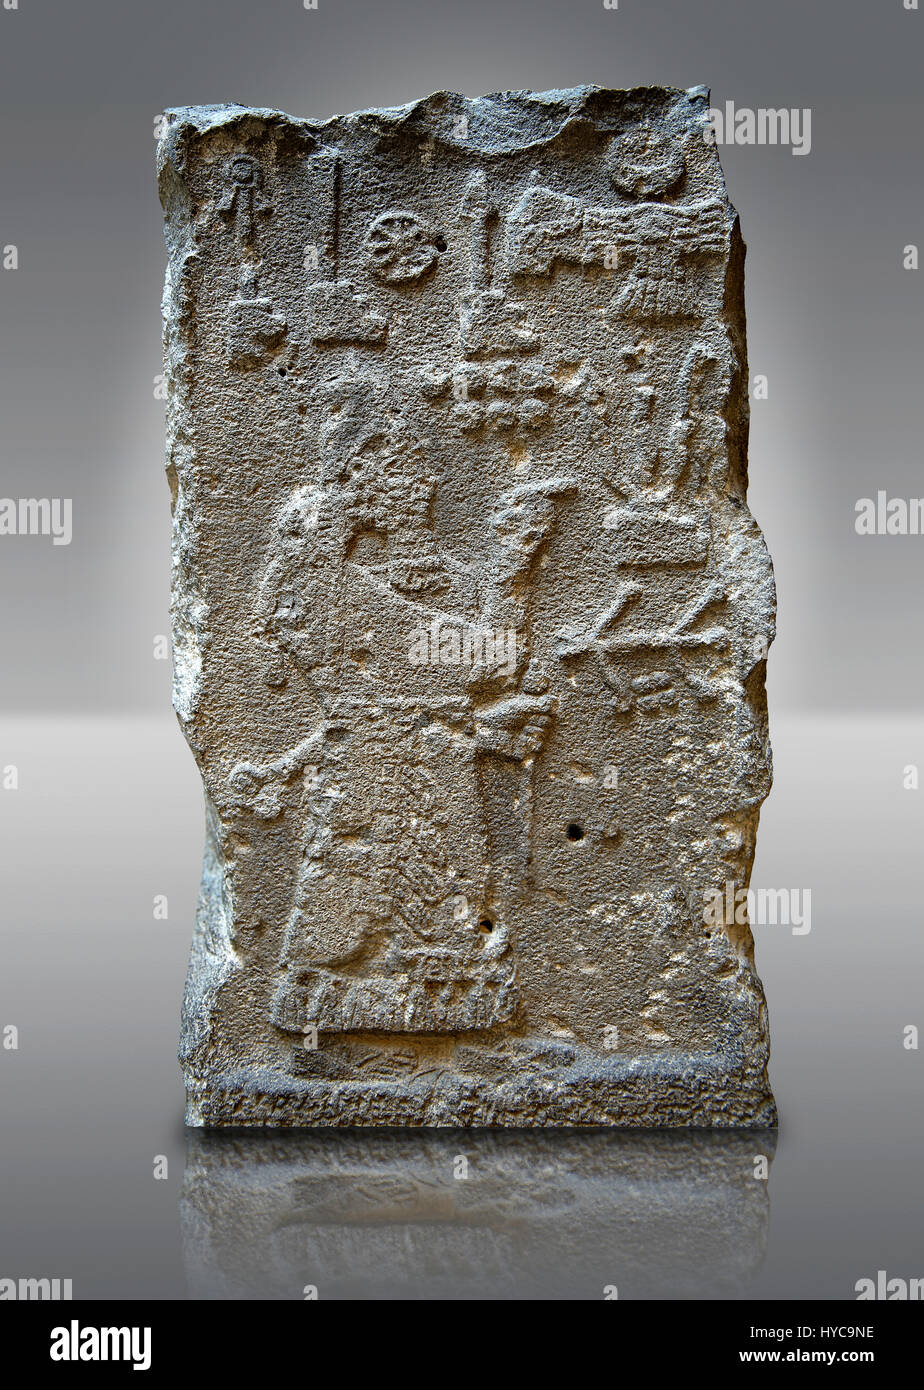 810-783 B.C Neo-Assyrian Stele with relief sculpture & inscription to King Adad-Nirari III (son of Samsi-Adad V, King of Assyria) praying to the gods. Stock Photo